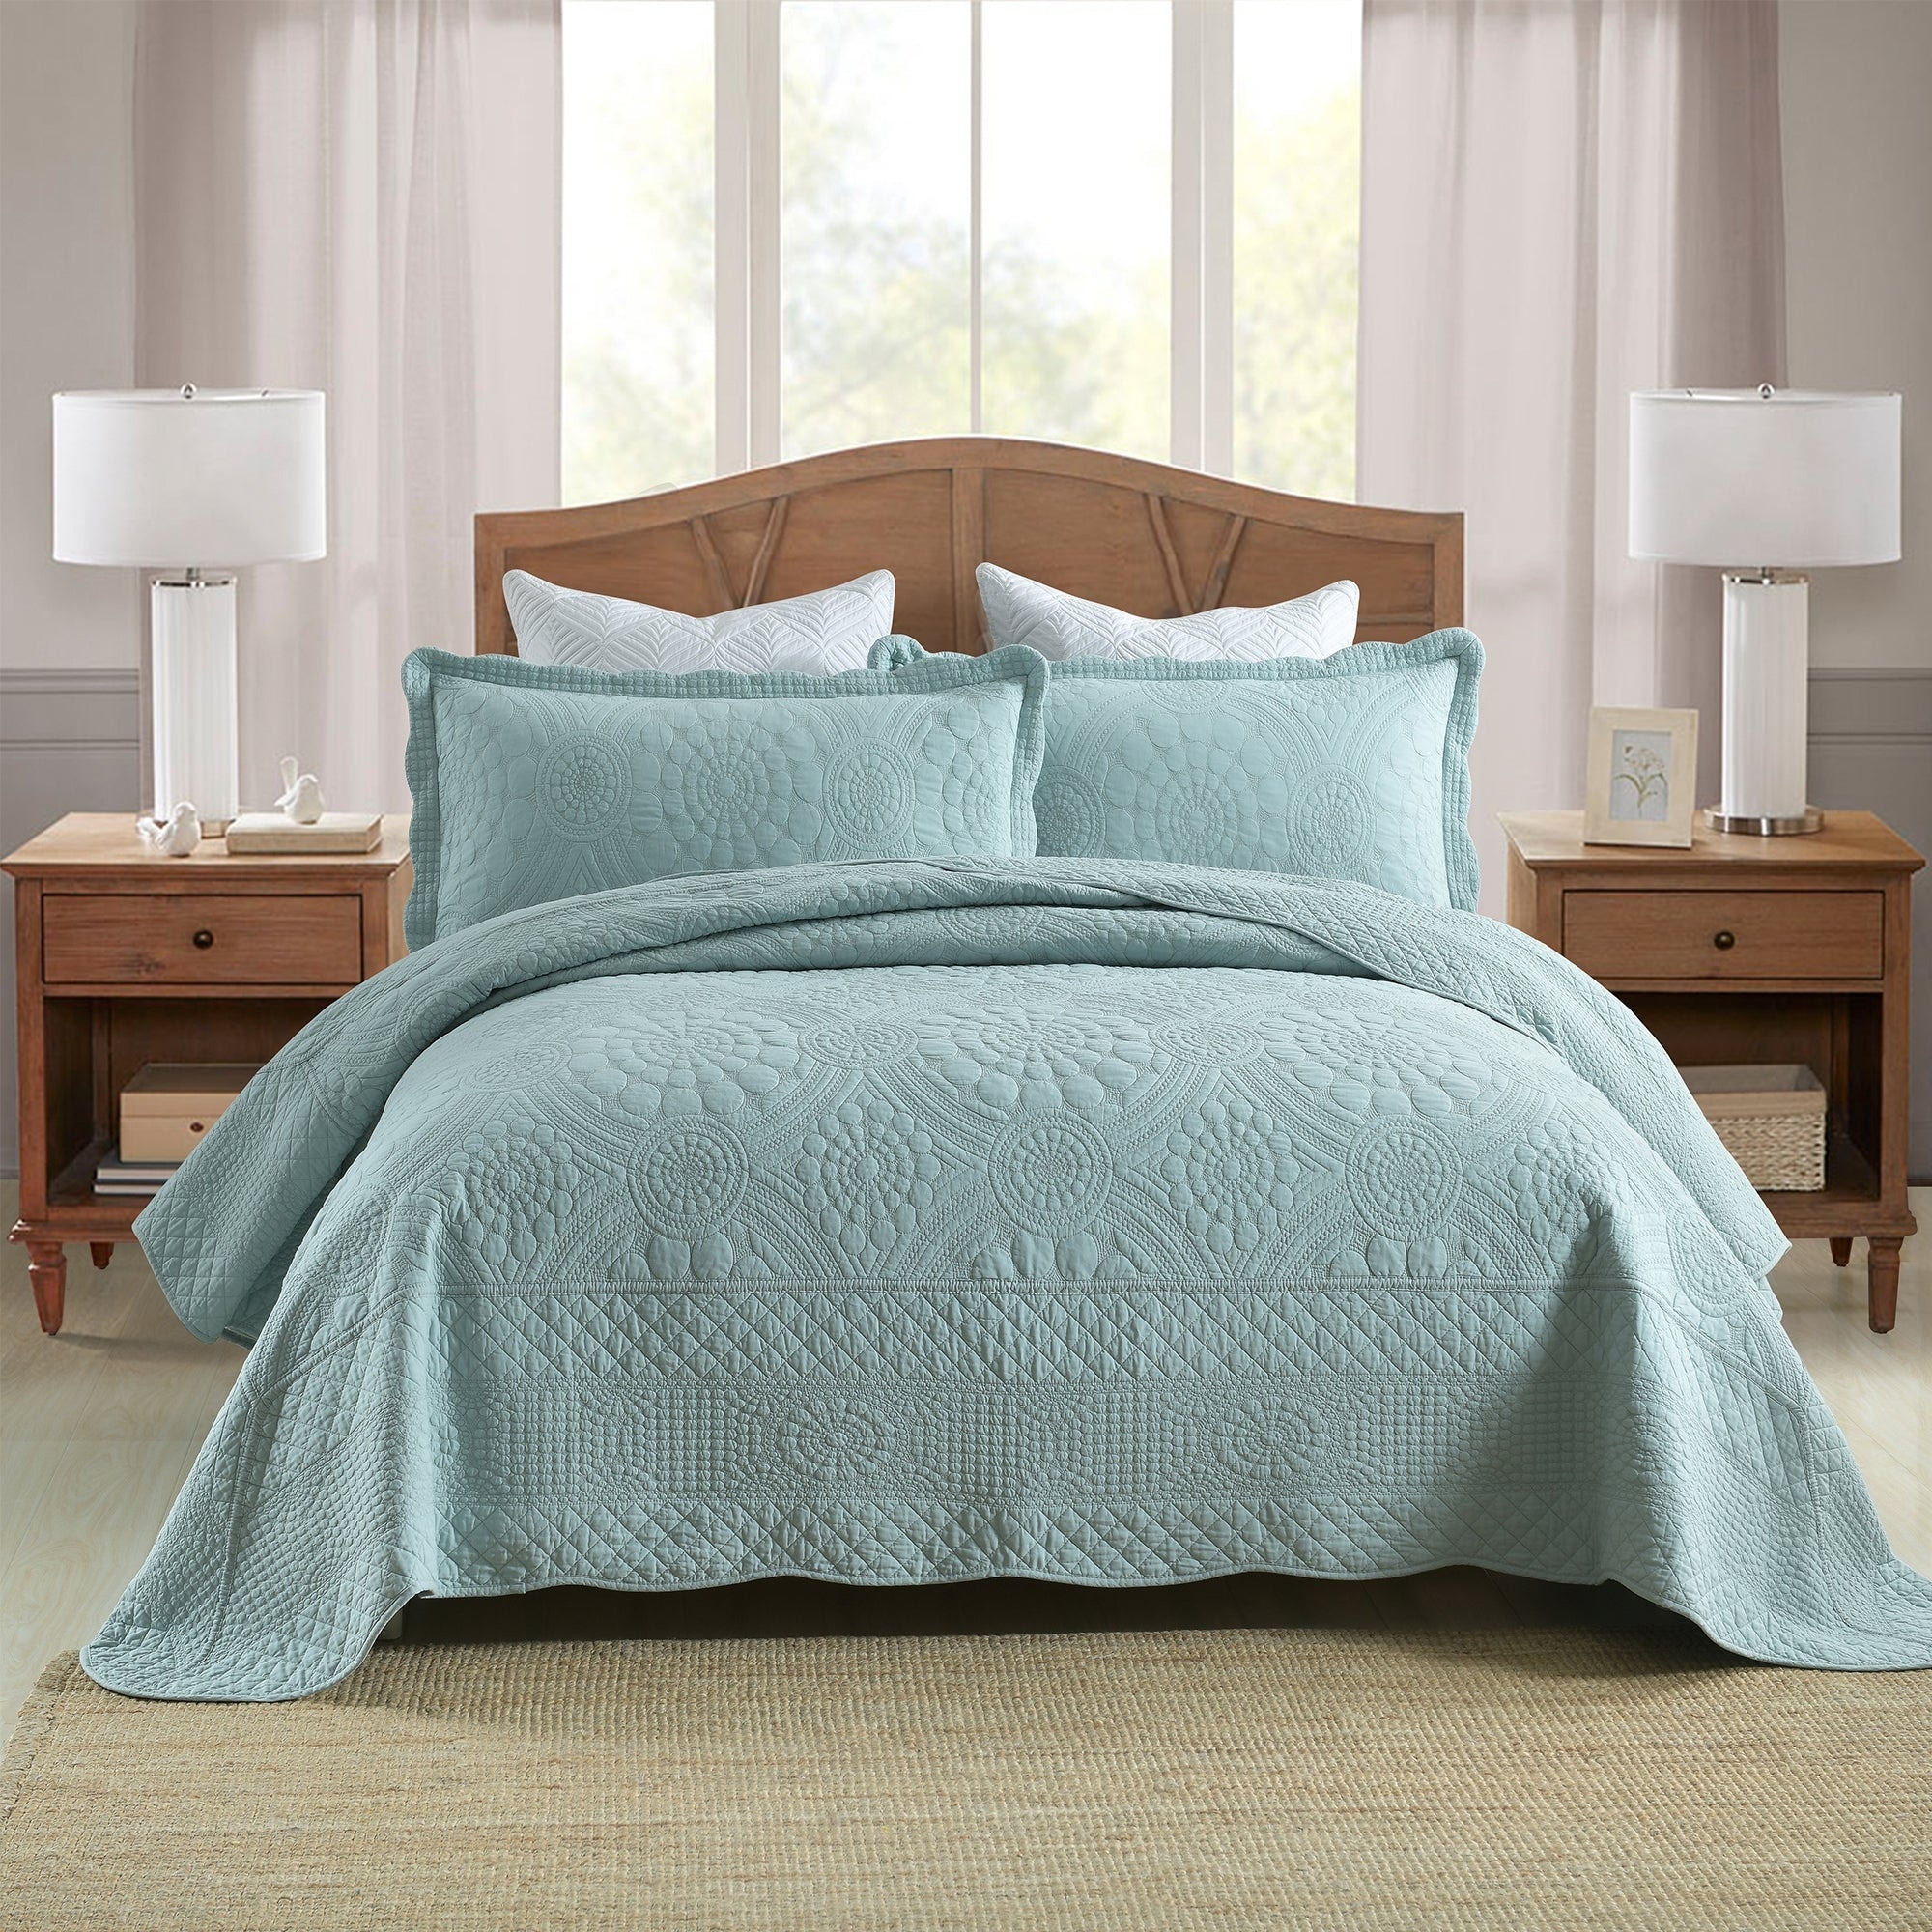 Oversized Queen Quilts and Bedspreads - Bed Bath & Beyond